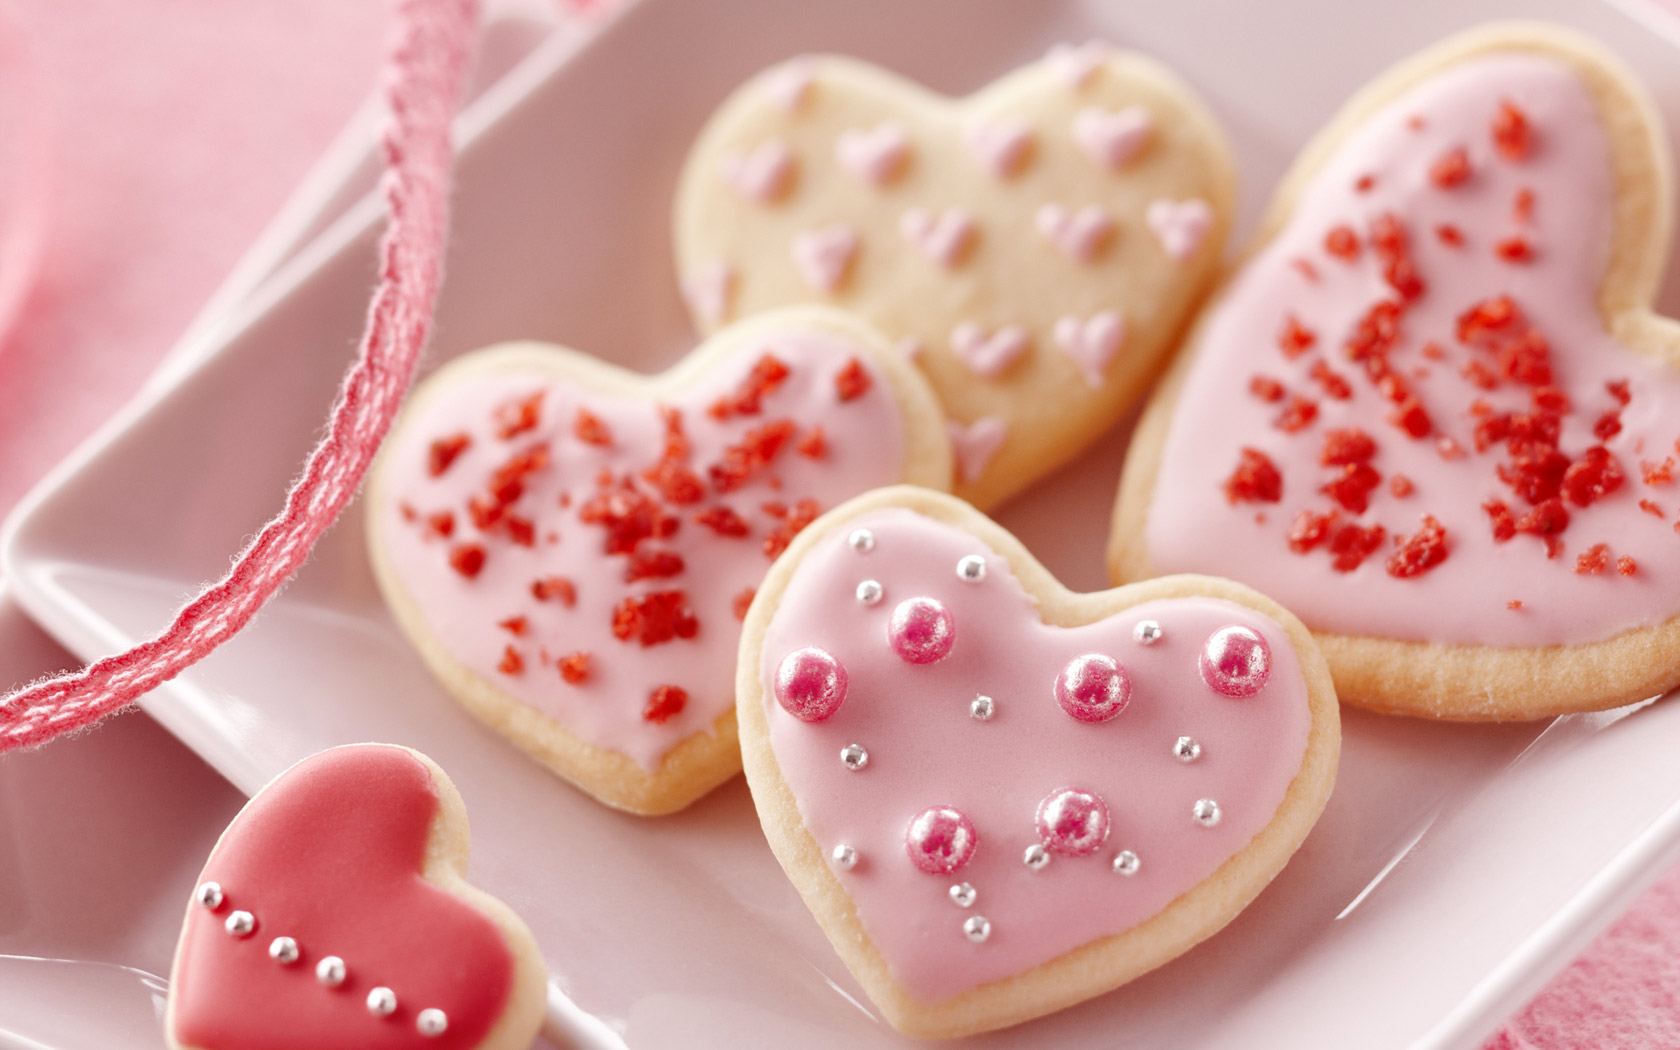 Cookies in the shape of a heart wallpapers and images - wallpapers ...